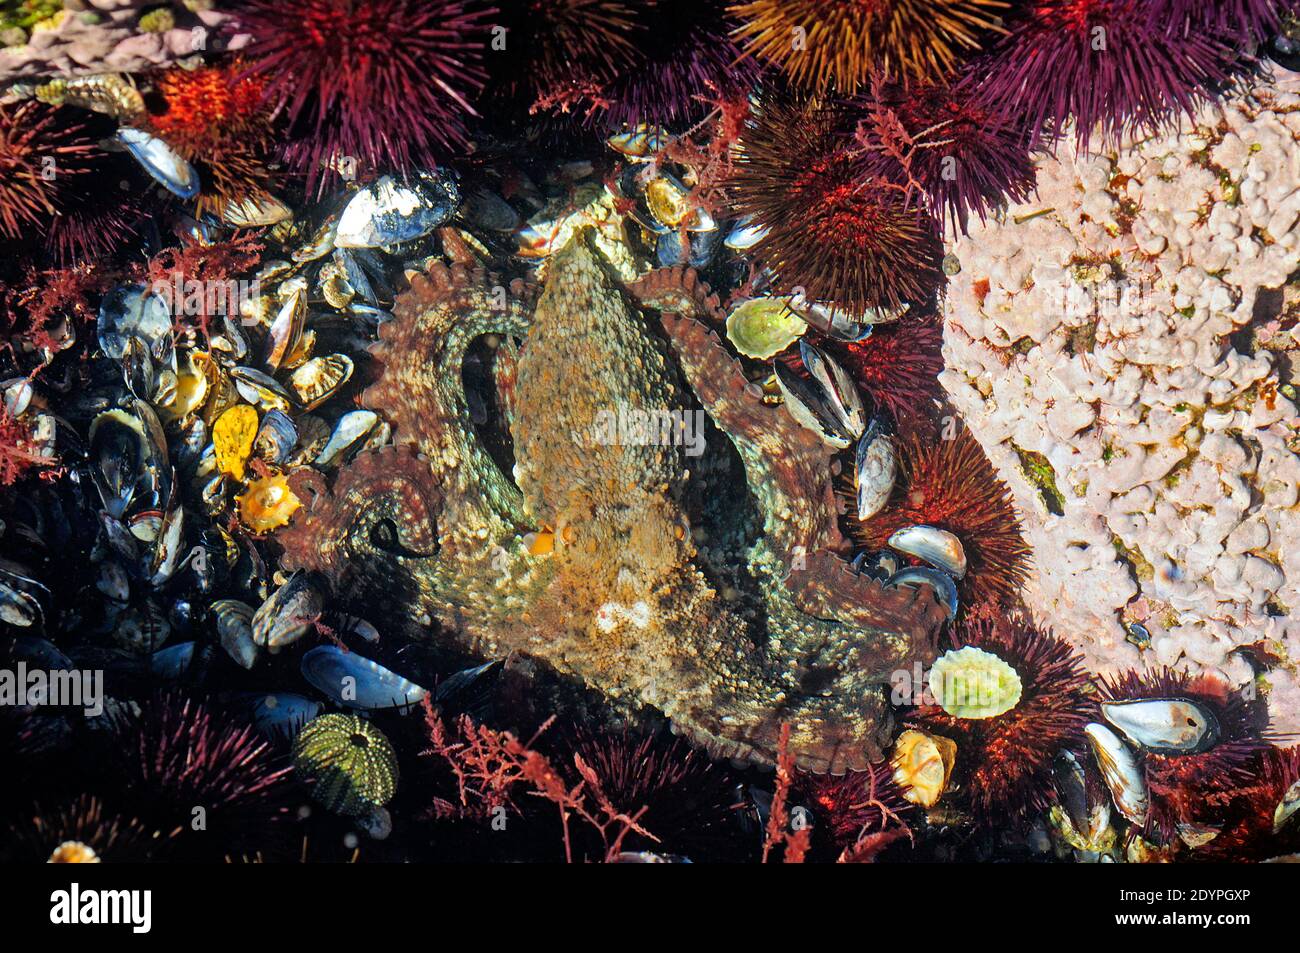 A common octopus (Octopus vulgaris) in a intertidal pond Stock Photo